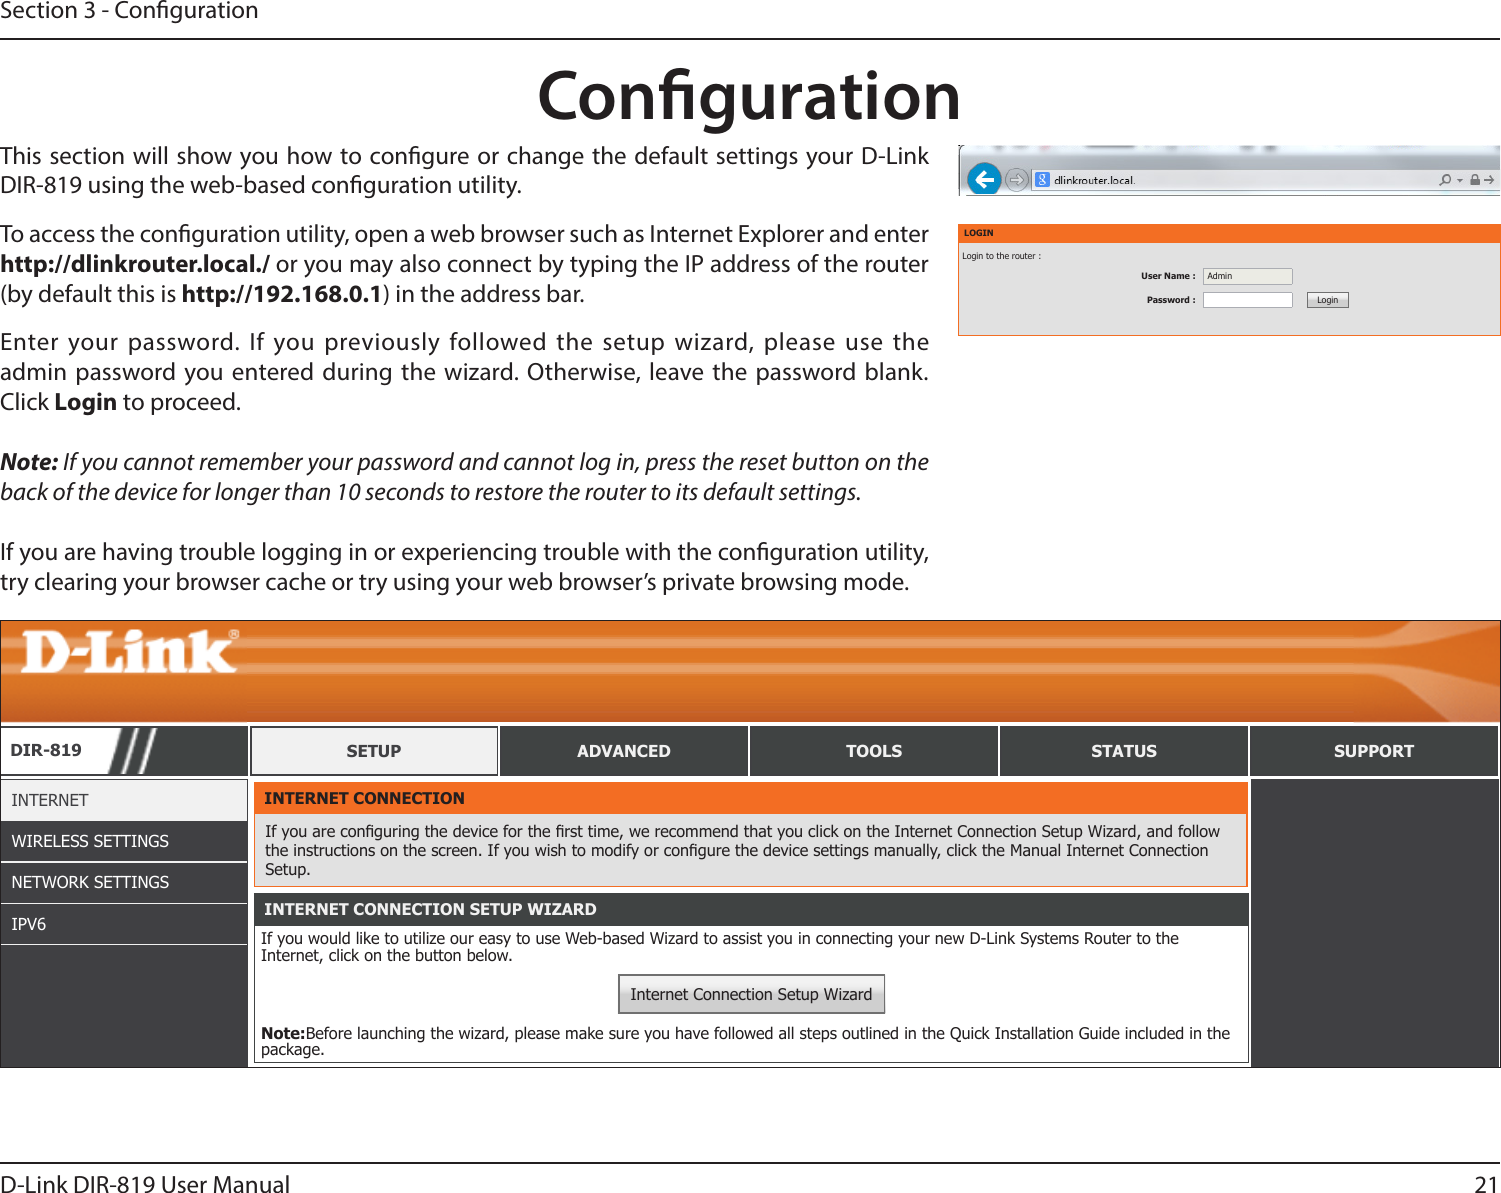 21D-Link DIR-819 User ManualSection 3 - CongurationThis section will show you how to congure or change the default settings your D-Link DIR-819 using the web-based conguration utility. CongurationTo access the conguration utility, open a web browser such as Internet Explorer and enter http://dlinkrouter.local./ or you may also connect by typing the IP address of the router (by default this is http://192.168.0.1) in the address bar.LOGINLogin to the router :User Name : AdminPassword : LoginEnter your password. If you previously followed the setup wizard, please use the admin password you entered during the wizard. Otherwise, leave the password blank.  Click Login to proceed.Note: If you cannot remember your password and cannot log in, press the reset button on the back of the device for longer than 10 seconds to restore the router to its default settings.If you are having trouble logging in or experiencing trouble with the conguration utility, try clearing your browser cache or try using your web browser’s private browsing mode.DIR-819 SETUP ADVANCED TOOLS STATUS SUPPORTINTERNETWIRELESS SETTINGSNETWORK SETTINGSIPV6INTERNET CONNECTIONIf you are conguring the device for the rst time, we recommend that you click on the Internet Connection Setup Wizard, and follow the instructions on the screen. If you wish to modify or congure the device settings manually, click the Manual Internet Connection Setup.INTERNET CONNECTION SETUP WIZARDIf you would like to utilize our easy to use Web-based Wizard to assist you in connecting your new D-Link Systems Router to the Internet, click on the button below.Internet Connection Setup WizardNote:Before launching the wizard, please make sure you have followed all steps outlined in the Quick Installation Guide included in the package.MANUAL INTERNET CONNECTION OPTIONIf you would like to congure the Internet settings of your new D-Link Router manually, then click on the button below.Manual Internet Connection Setup